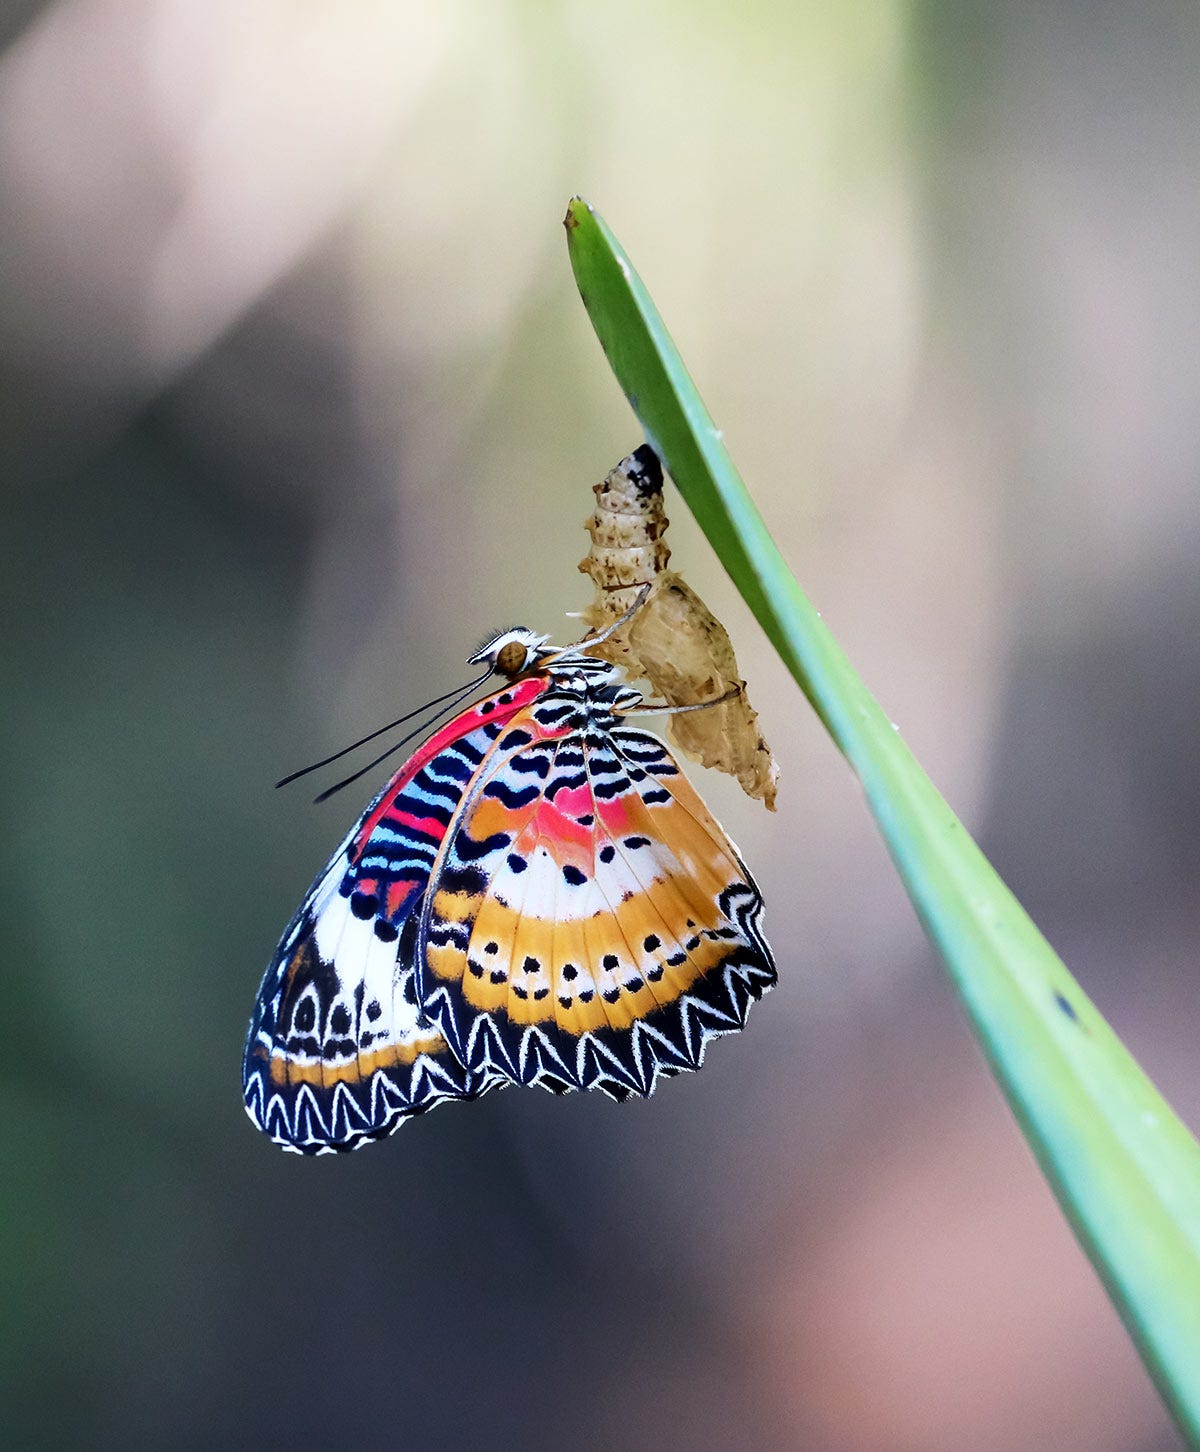 A butterfly emerging from a chrysalis.